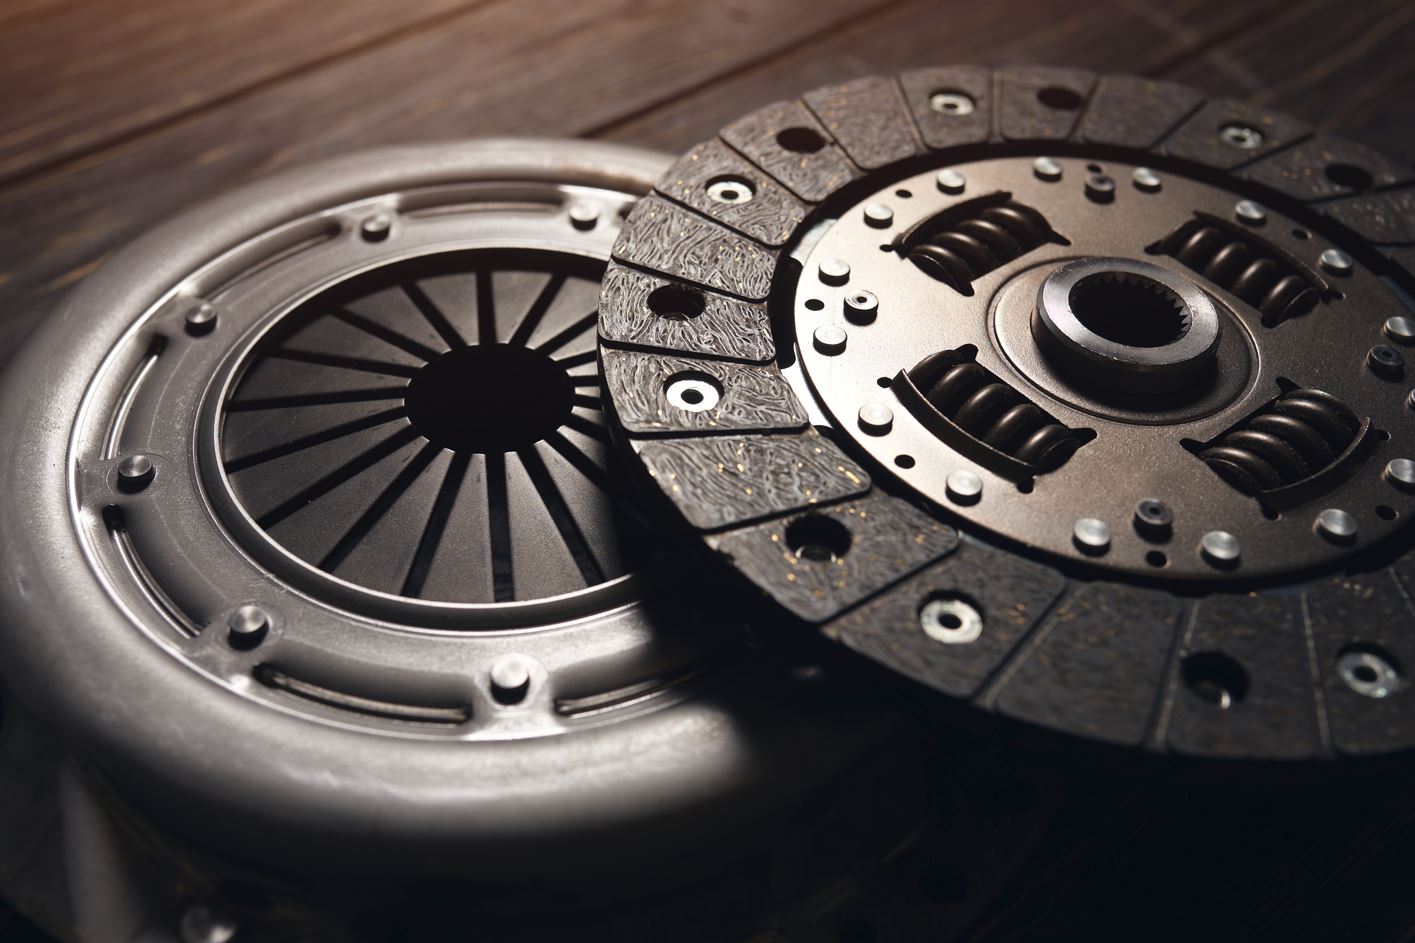 Aftermarket Clutch Kits: The Secret Weapon for Faster Launches and Smoother Shifts